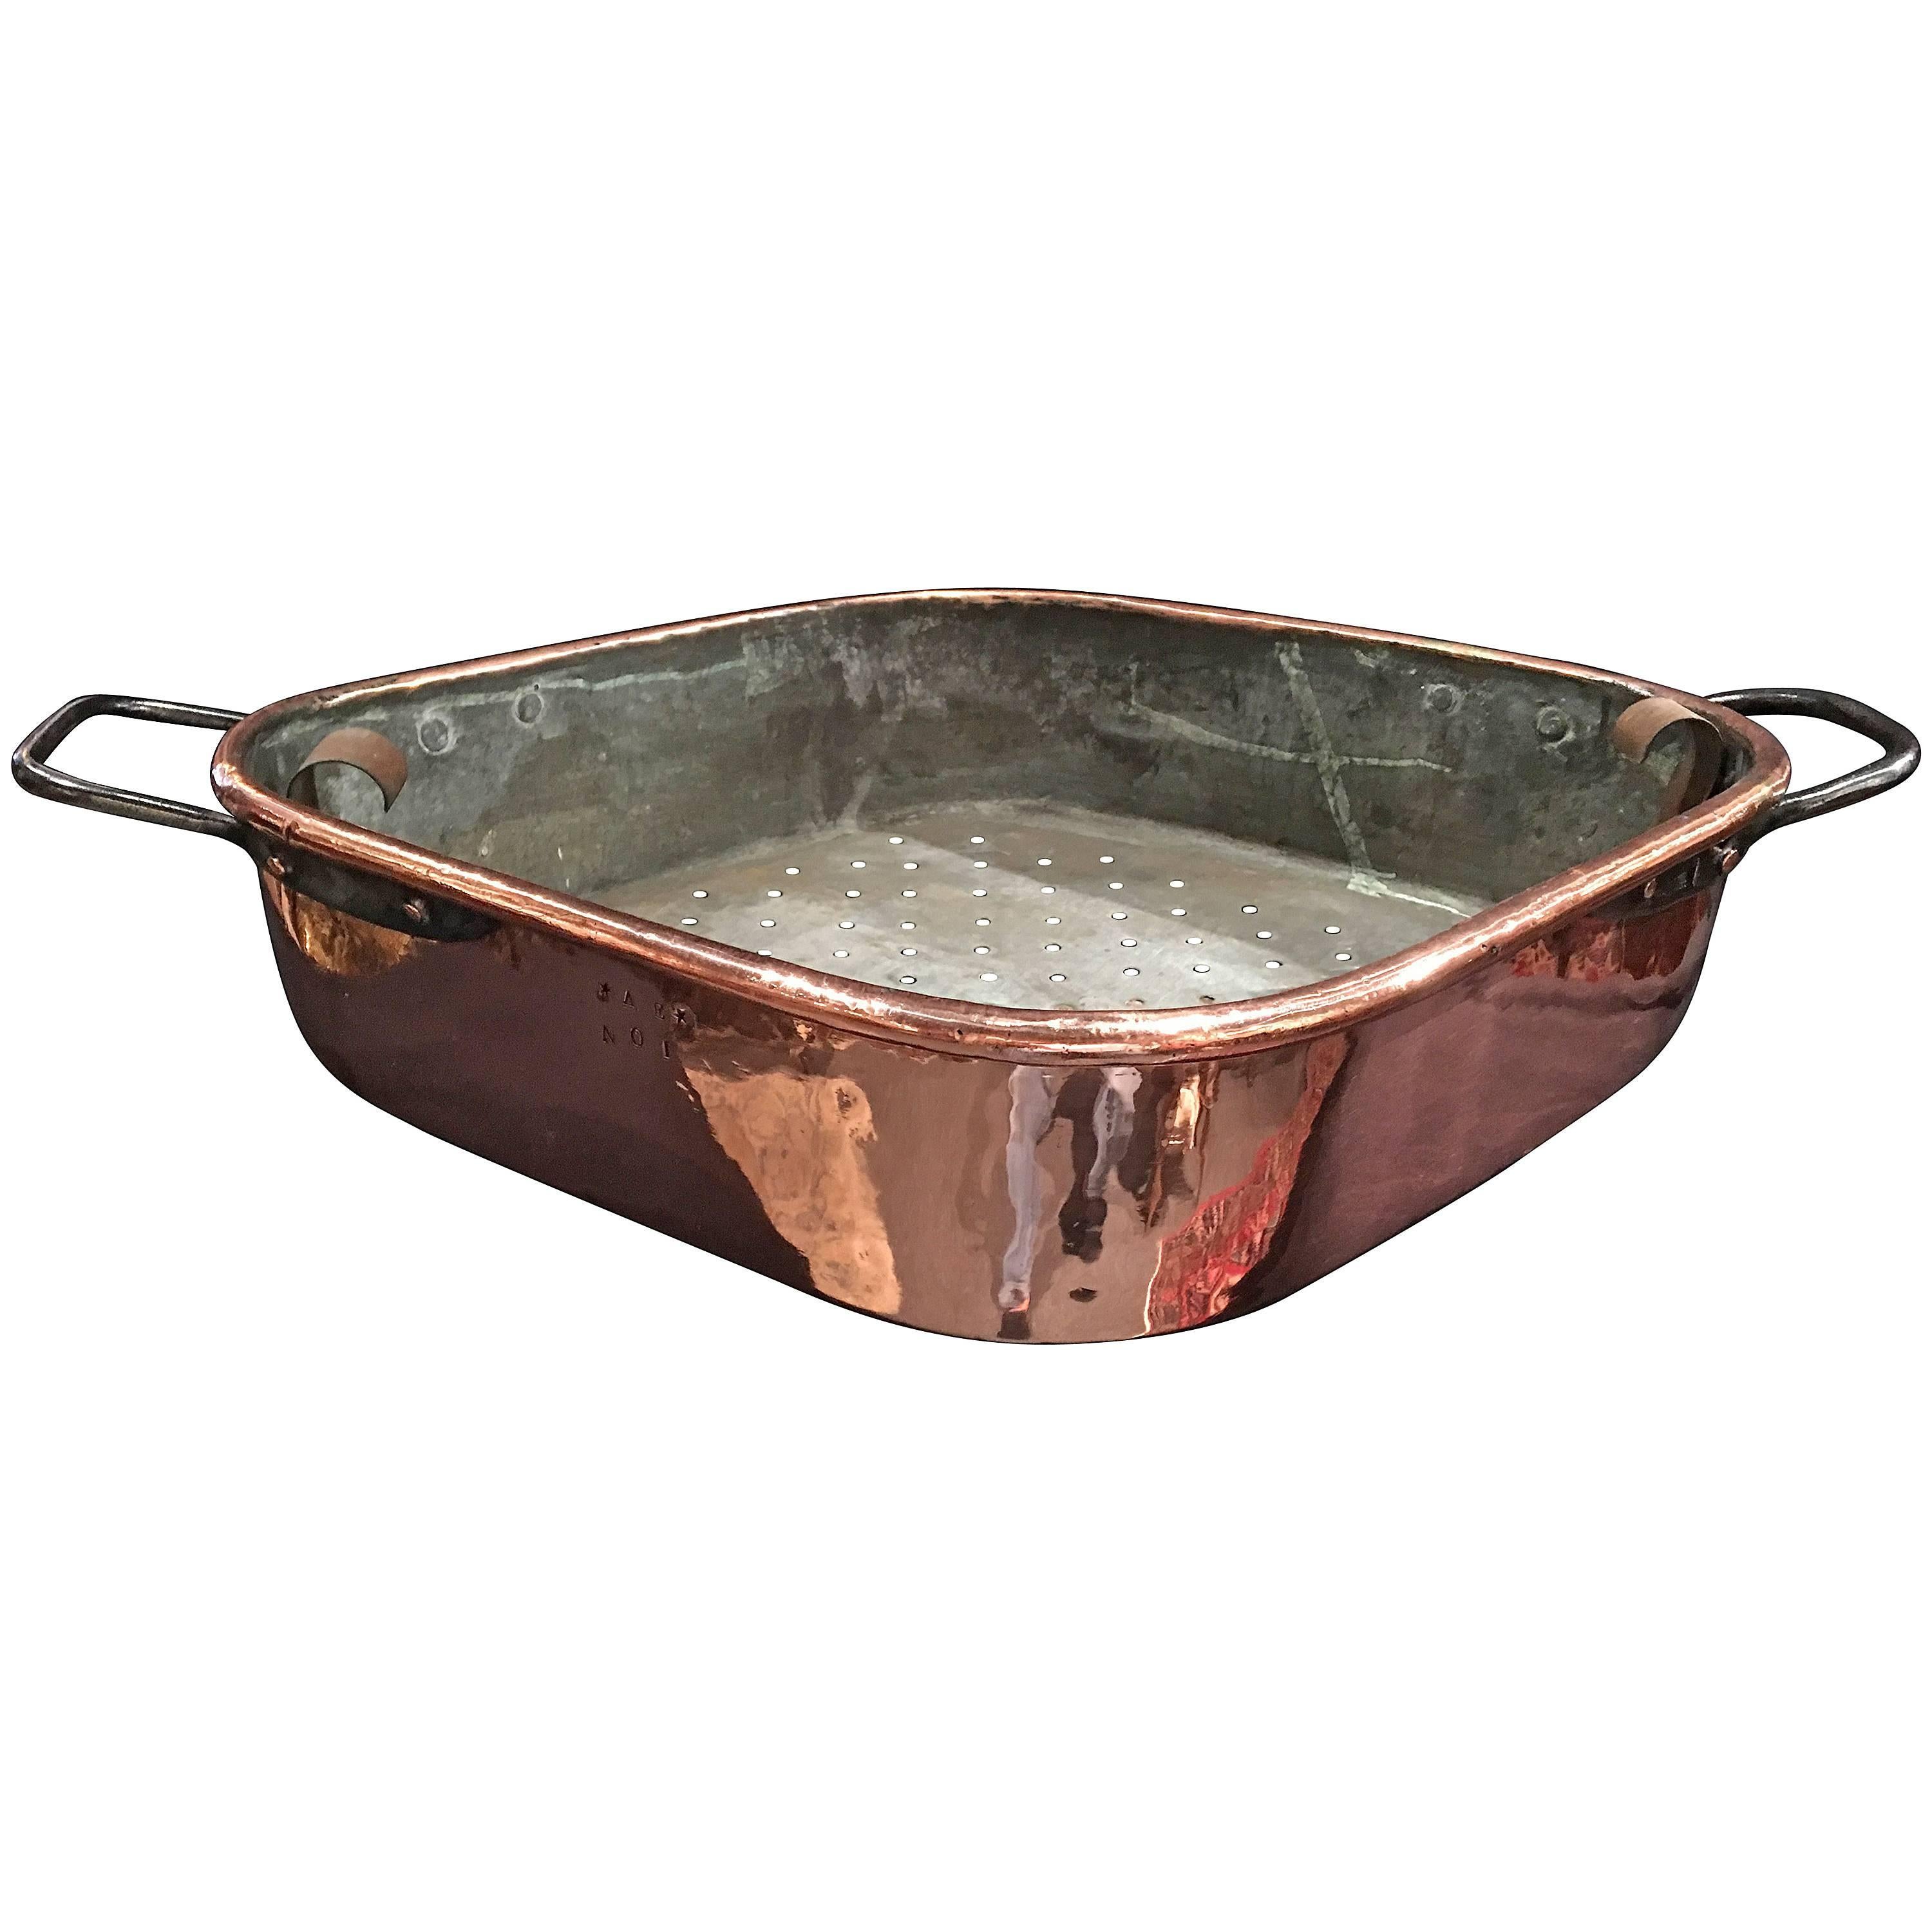 French Polished Copper Fish Kettle or Planter with Iron Handles, 19th Century